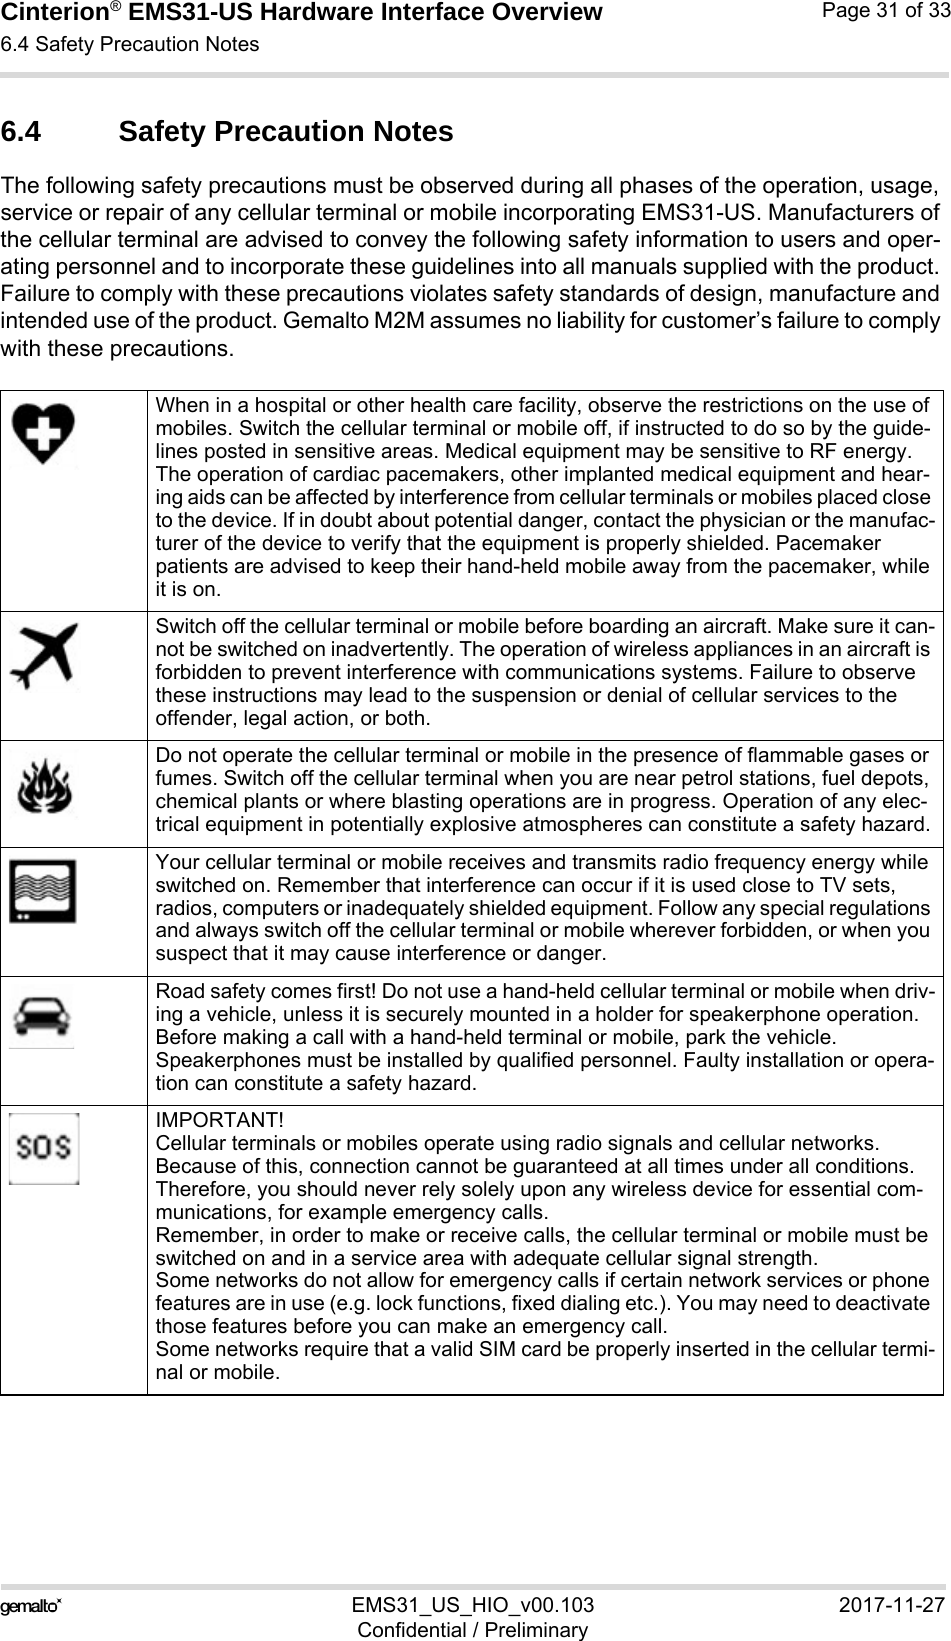 Cinterion® EMS31-US Hardware Interface Overview6.4 Safety Precaution Notes31EMS31_US_HIO_v00.103 2017-11-27Confidential / PreliminaryPage 31 of 336.4 Safety Precaution NotesThe following safety precautions must be observed during all phases of the operation, usage, service or repair of any cellular terminal or mobile incorporating EMS31-US. Manufacturers of the cellular terminal are advised to convey the following safety information to users and oper-ating personnel and to incorporate these guidelines into all manuals supplied with the product. Failure to comply with these precautions violates safety standards of design, manufacture and intended use of the product. Gemalto M2M assumes no liability for customer’s failure to comply with these precautions.When in a hospital or other health care facility, observe the restrictions on the use of mobiles. Switch the cellular terminal or mobile off, if instructed to do so by the guide-lines posted in sensitive areas. Medical equipment may be sensitive to RF energy. The operation of cardiac pacemakers, other implanted medical equipment and hear-ing aids can be affected by interference from cellular terminals or mobiles placed close to the device. If in doubt about potential danger, contact the physician or the manufac-turer of the device to verify that the equipment is properly shielded. Pacemaker patients are advised to keep their hand-held mobile away from the pacemaker, while it is on. Switch off the cellular terminal or mobile before boarding an aircraft. Make sure it can-not be switched on inadvertently. The operation of wireless appliances in an aircraft is forbidden to prevent interference with communications systems. Failure to observe these instructions may lead to the suspension or denial of cellular services to the offender, legal action, or both.Do not operate the cellular terminal or mobile in the presence of flammable gases or fumes. Switch off the cellular terminal when you are near petrol stations, fuel depots, chemical plants or where blasting operations are in progress. Operation of any elec-trical equipment in potentially explosive atmospheres can constitute a safety hazard.Your cellular terminal or mobile receives and transmits radio frequency energy while switched on. Remember that interference can occur if it is used close to TV sets, radios, computers or inadequately shielded equipment. Follow any special regulations and always switch off the cellular terminal or mobile wherever forbidden, or when you suspect that it may cause interference or danger.Road safety comes first! Do not use a hand-held cellular terminal or mobile when driv-ing a vehicle, unless it is securely mounted in a holder for speakerphone operation. Before making a call with a hand-held terminal or mobile, park the vehicle. Speakerphones must be installed by qualified personnel. Faulty installation or opera-tion can constitute a safety hazard.IMPORTANT!Cellular terminals or mobiles operate using radio signals and cellular networks. Because of this, connection cannot be guaranteed at all times under all conditions. Therefore, you should never rely solely upon any wireless device for essential com-munications, for example emergency calls. Remember, in order to make or receive calls, the cellular terminal or mobile must be switched on and in a service area with adequate cellular signal strength. Some networks do not allow for emergency calls if certain network services or phone features are in use (e.g. lock functions, fixed dialing etc.). You may need to deactivate those features before you can make an emergency call.Some networks require that a valid SIM card be properly inserted in the cellular termi-nal or mobile.